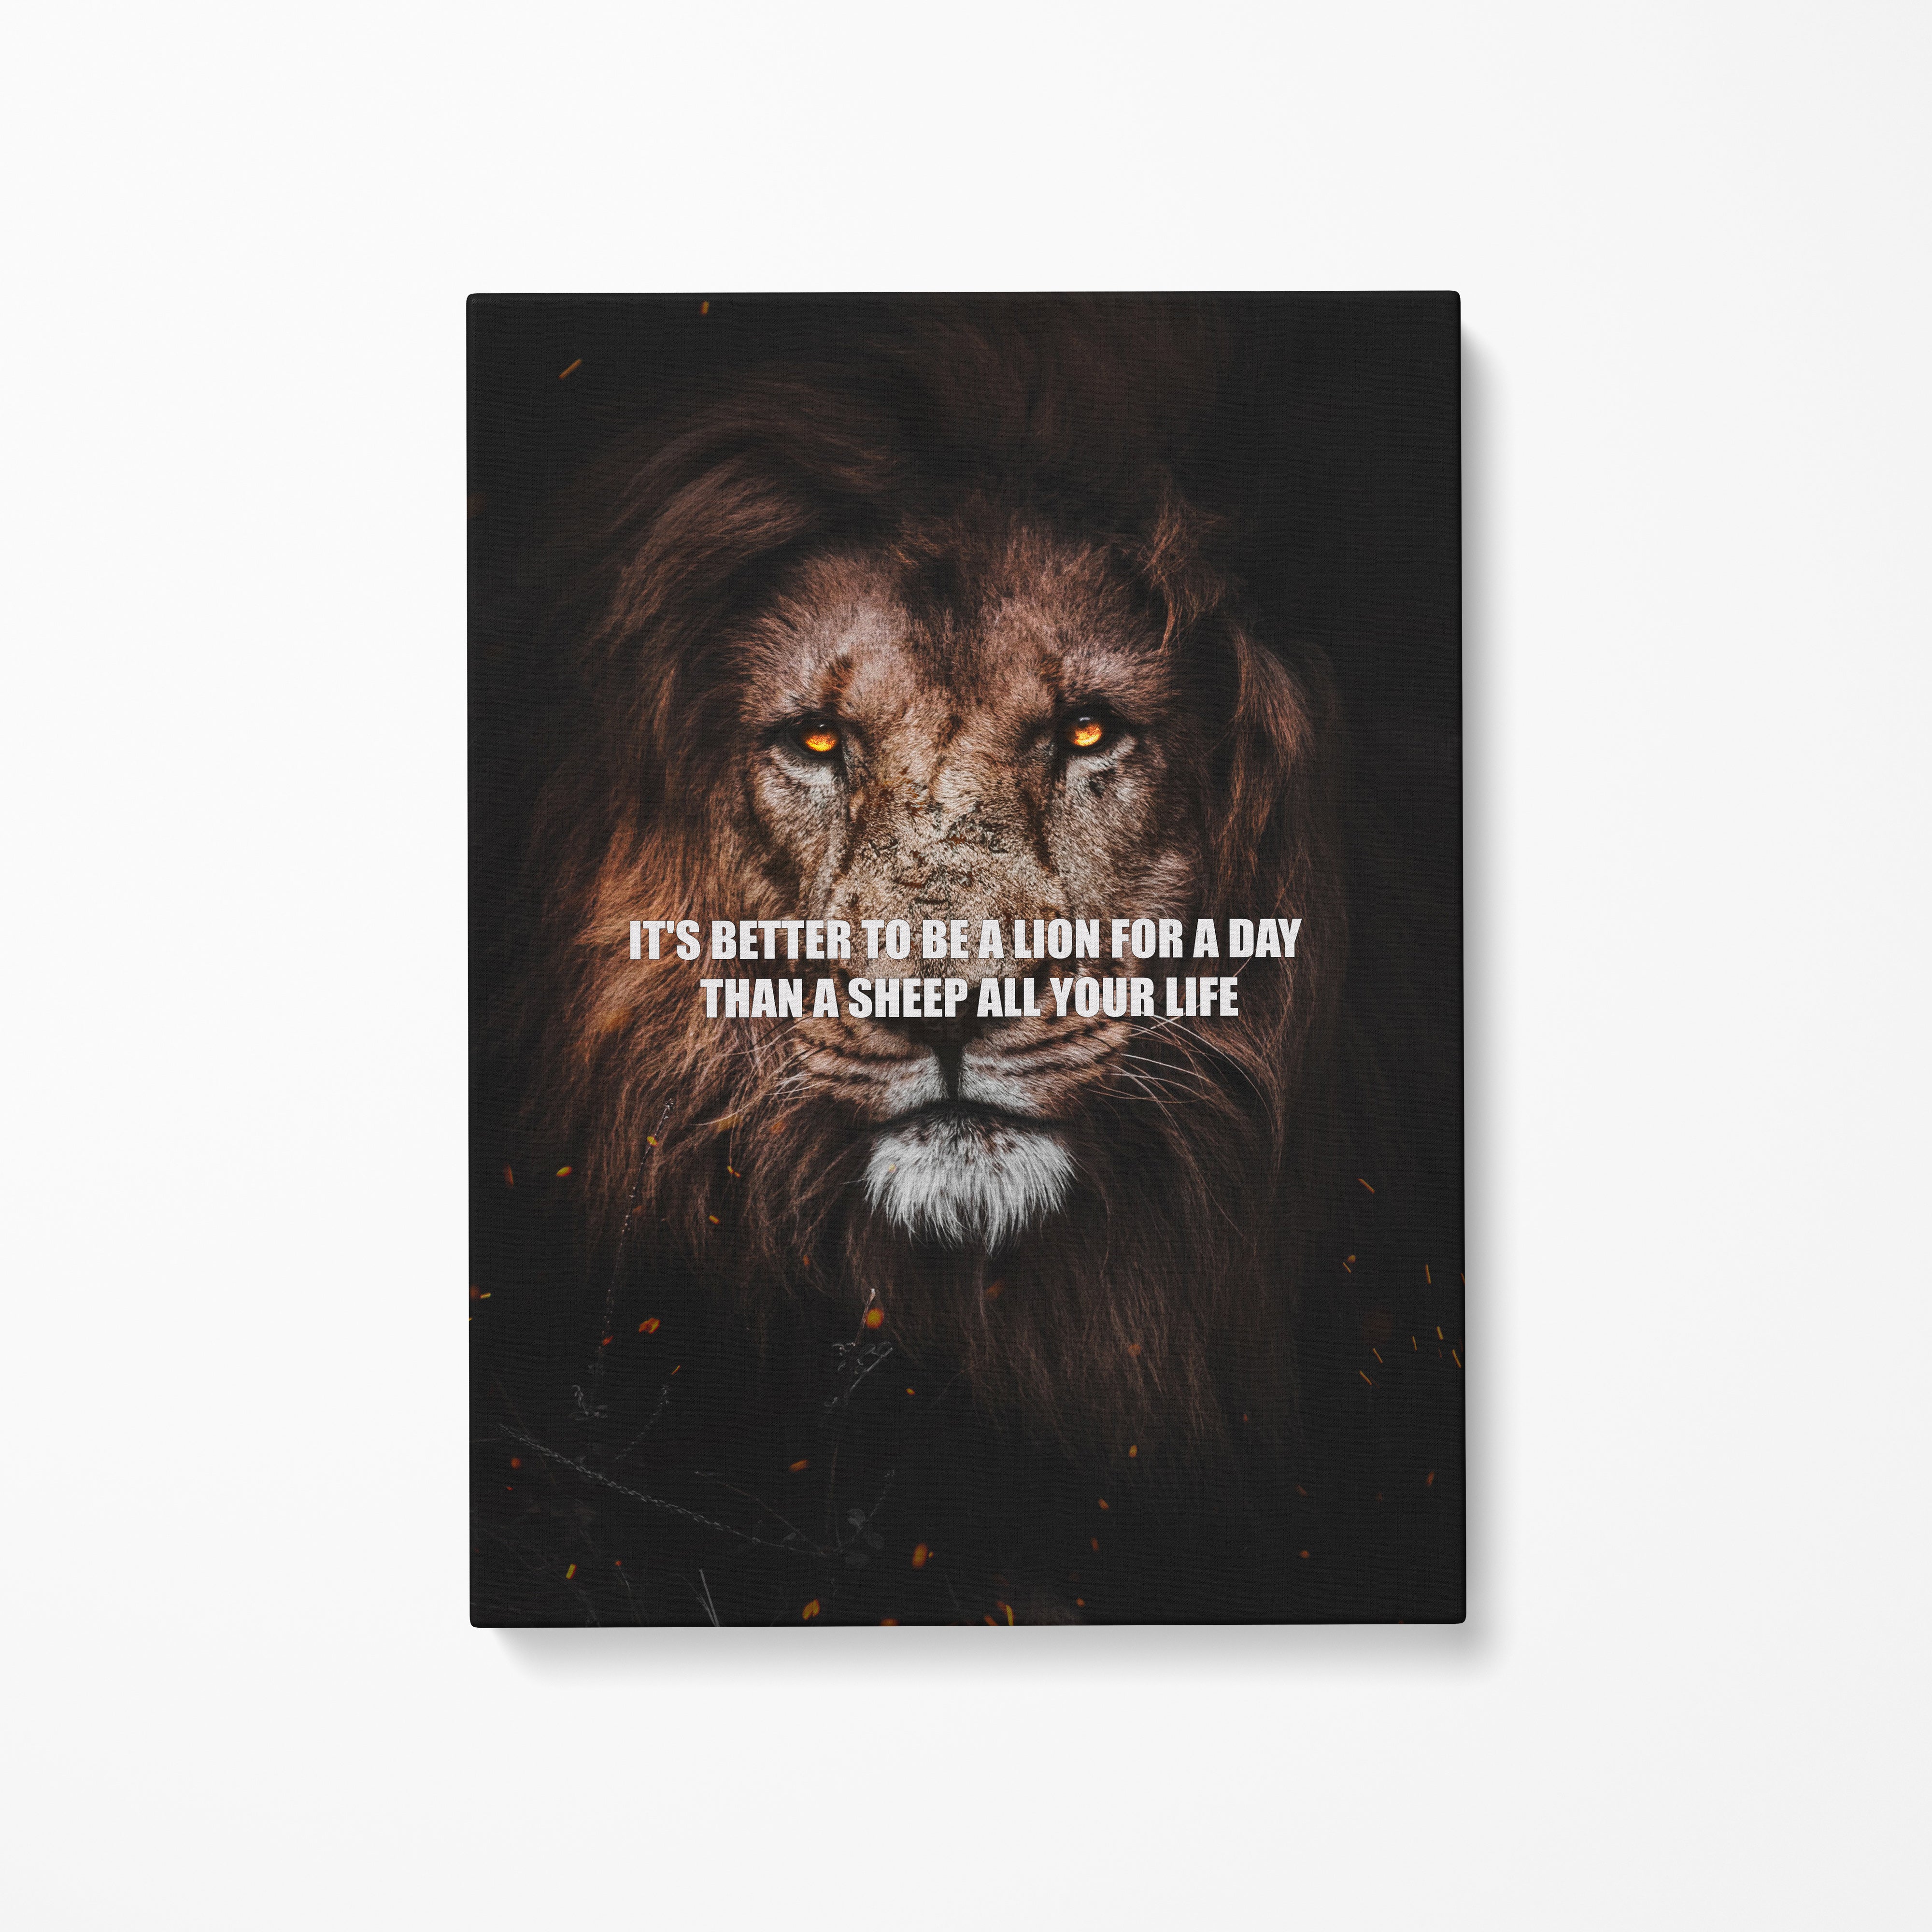 Become The Lion